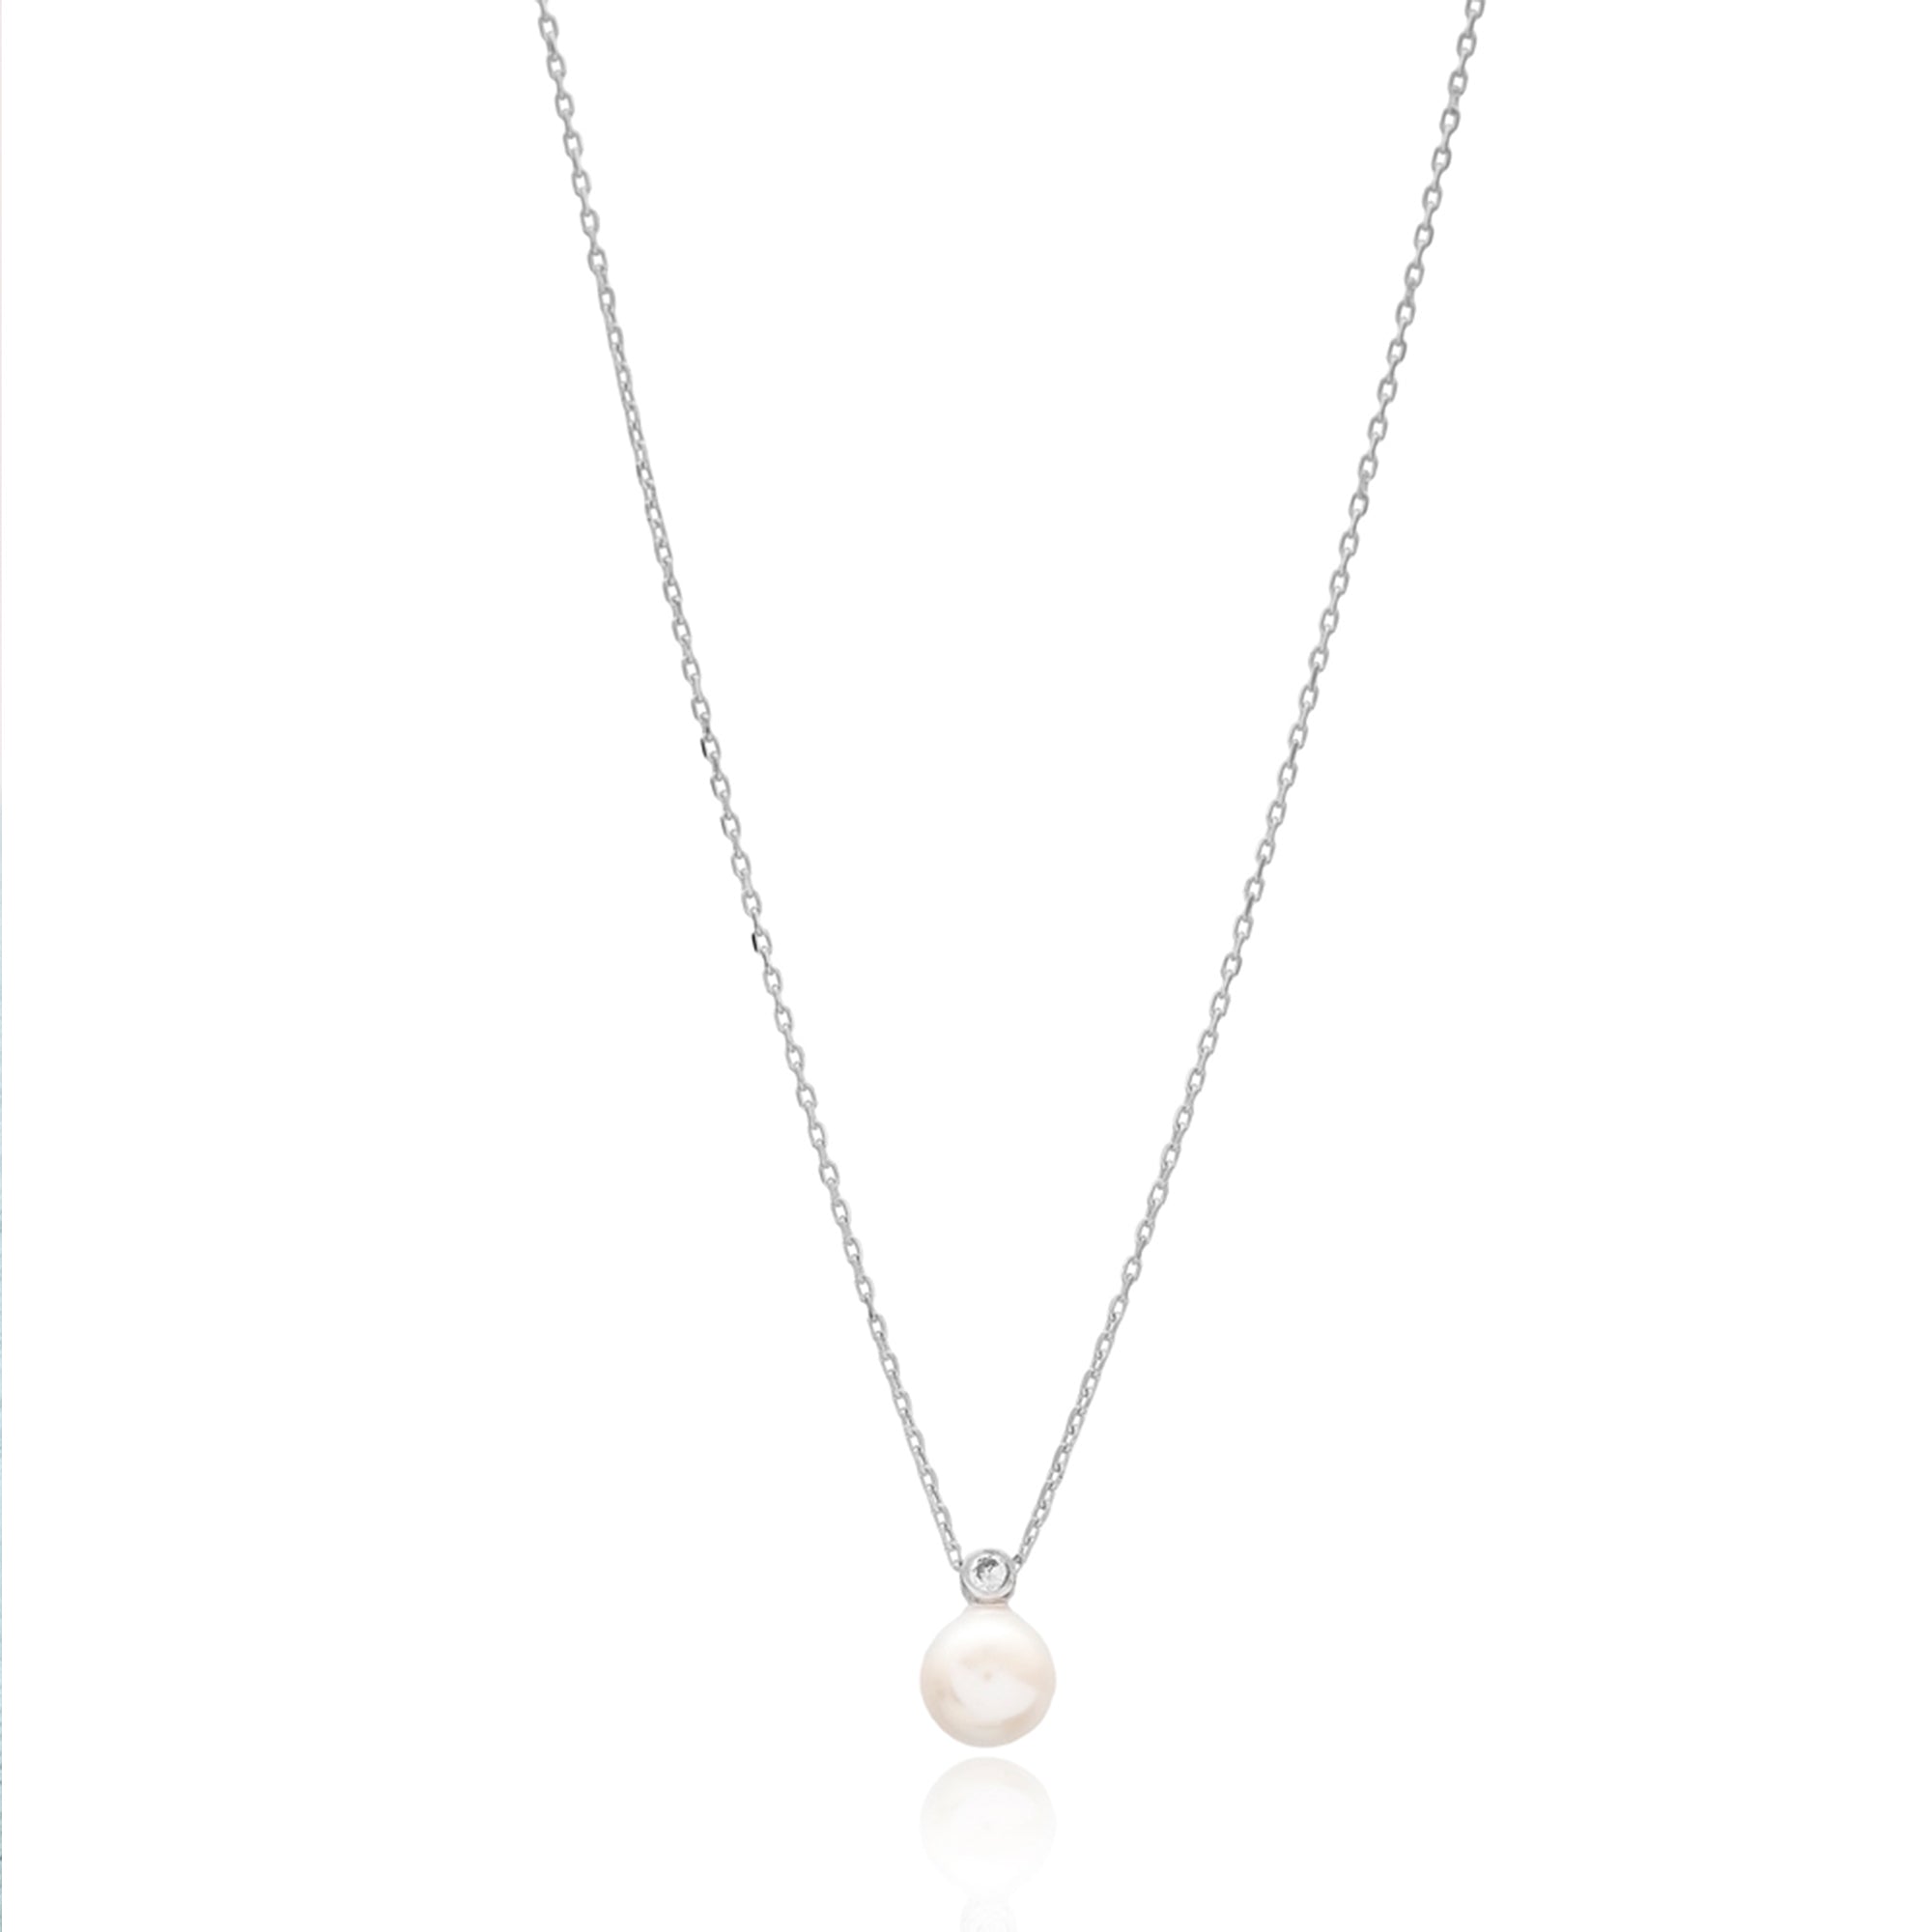 Dainty Ball Necklace with Cubic Zirconia Stone - 925 Sterling Silver